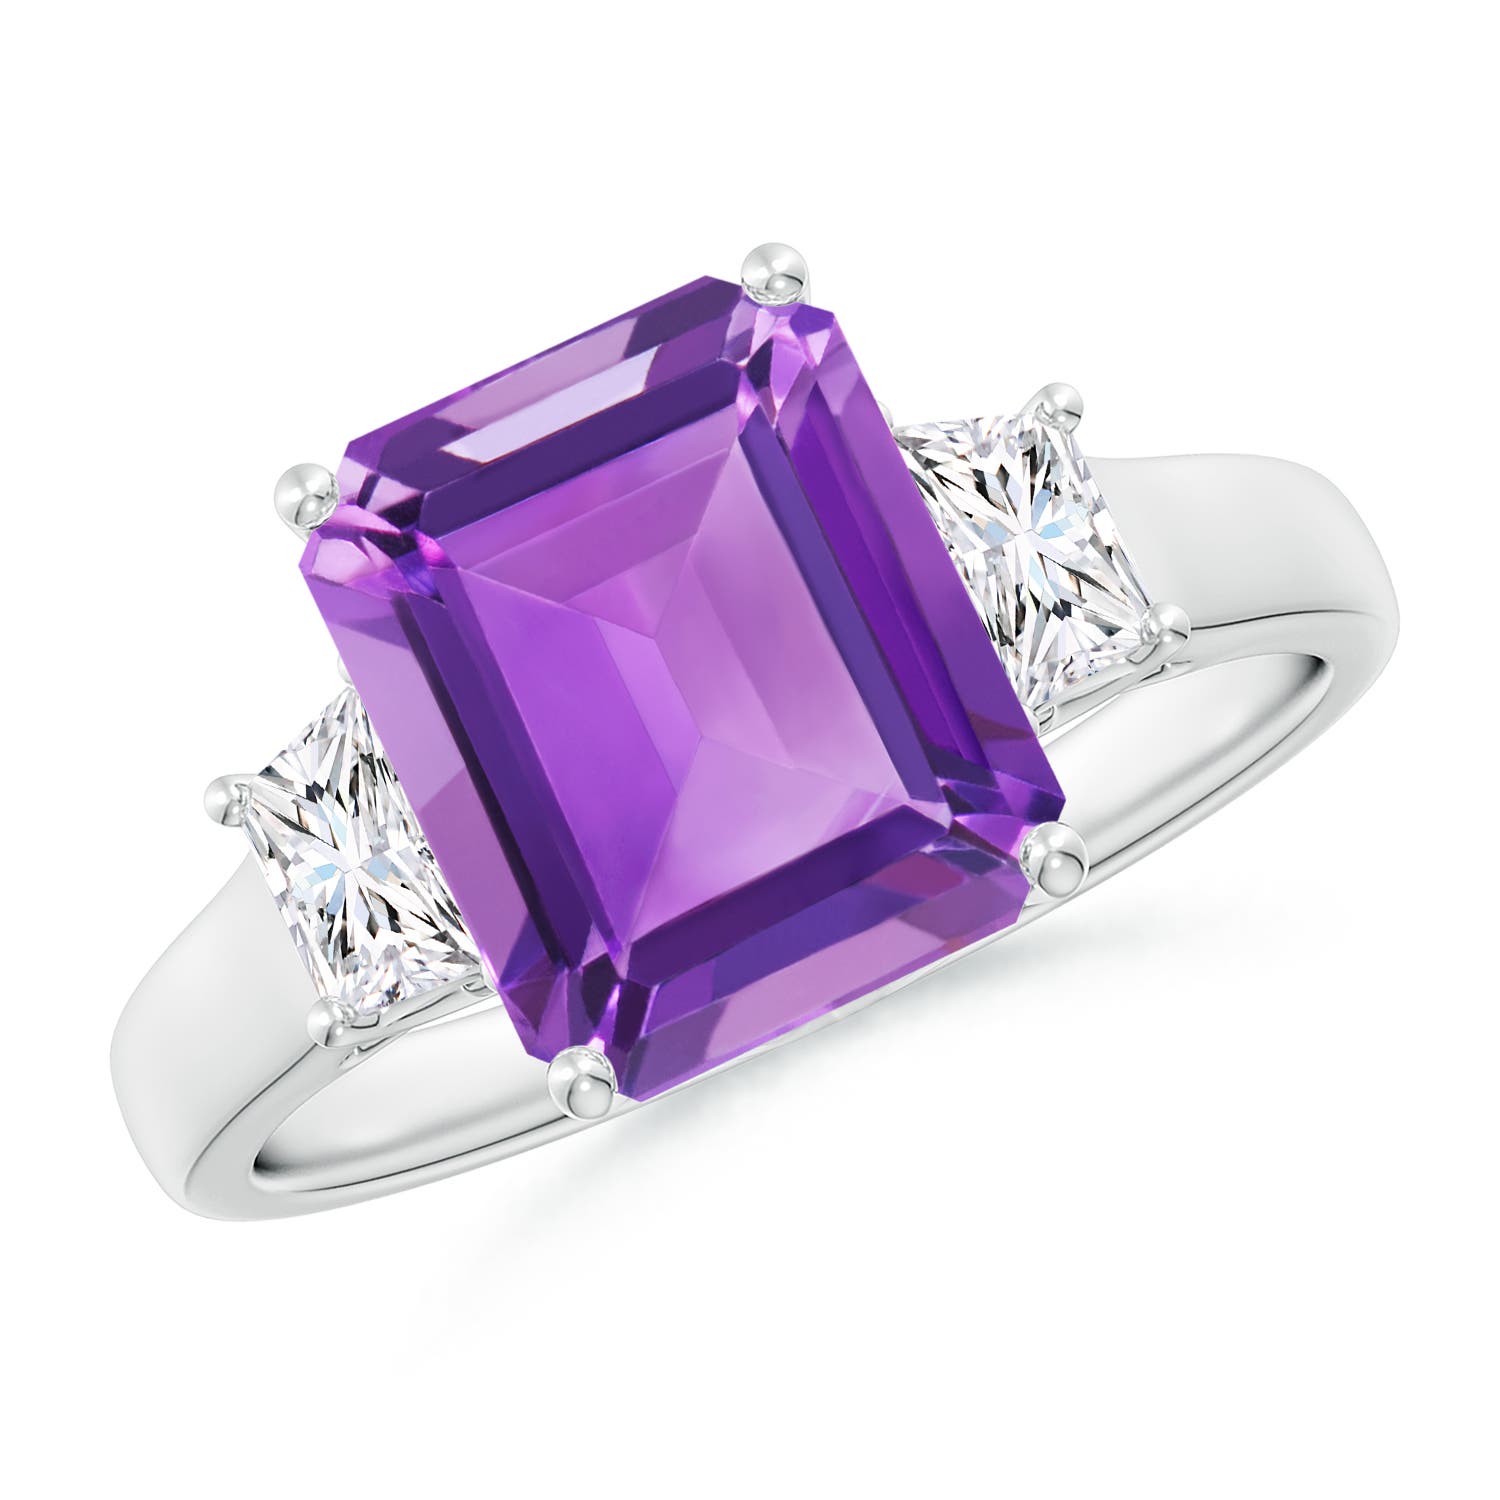 AA- Amethyst / 3.22 CT / 14 KT White Gold